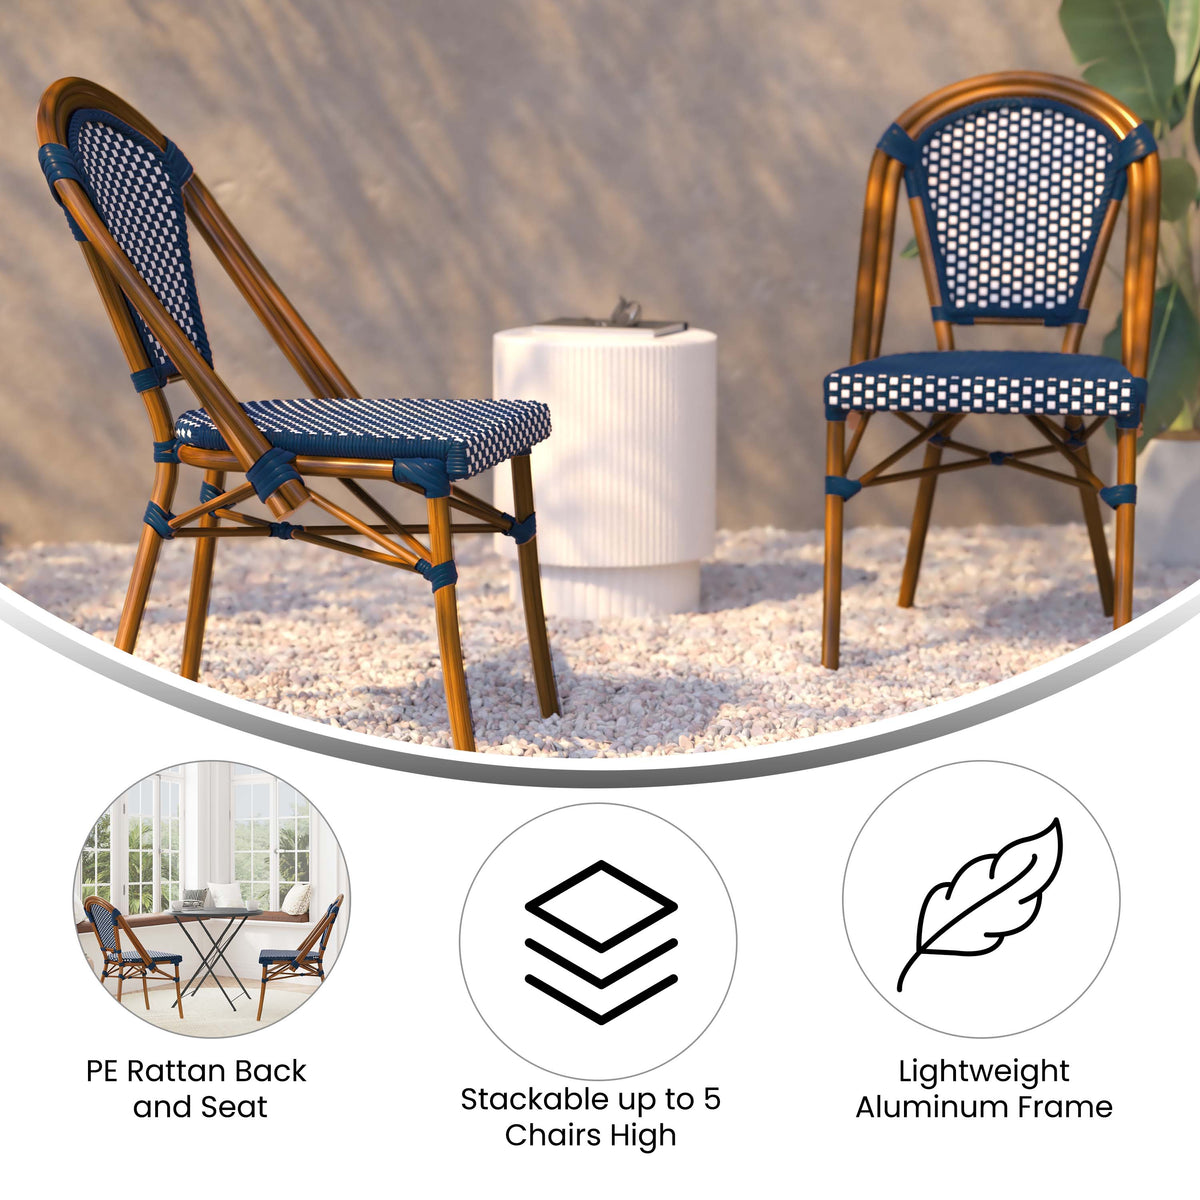 Navy & White/Natural Frame |#| All-Weather Commercial Paris Chair with Bamboo Print Aluminum Frame-Navy/White